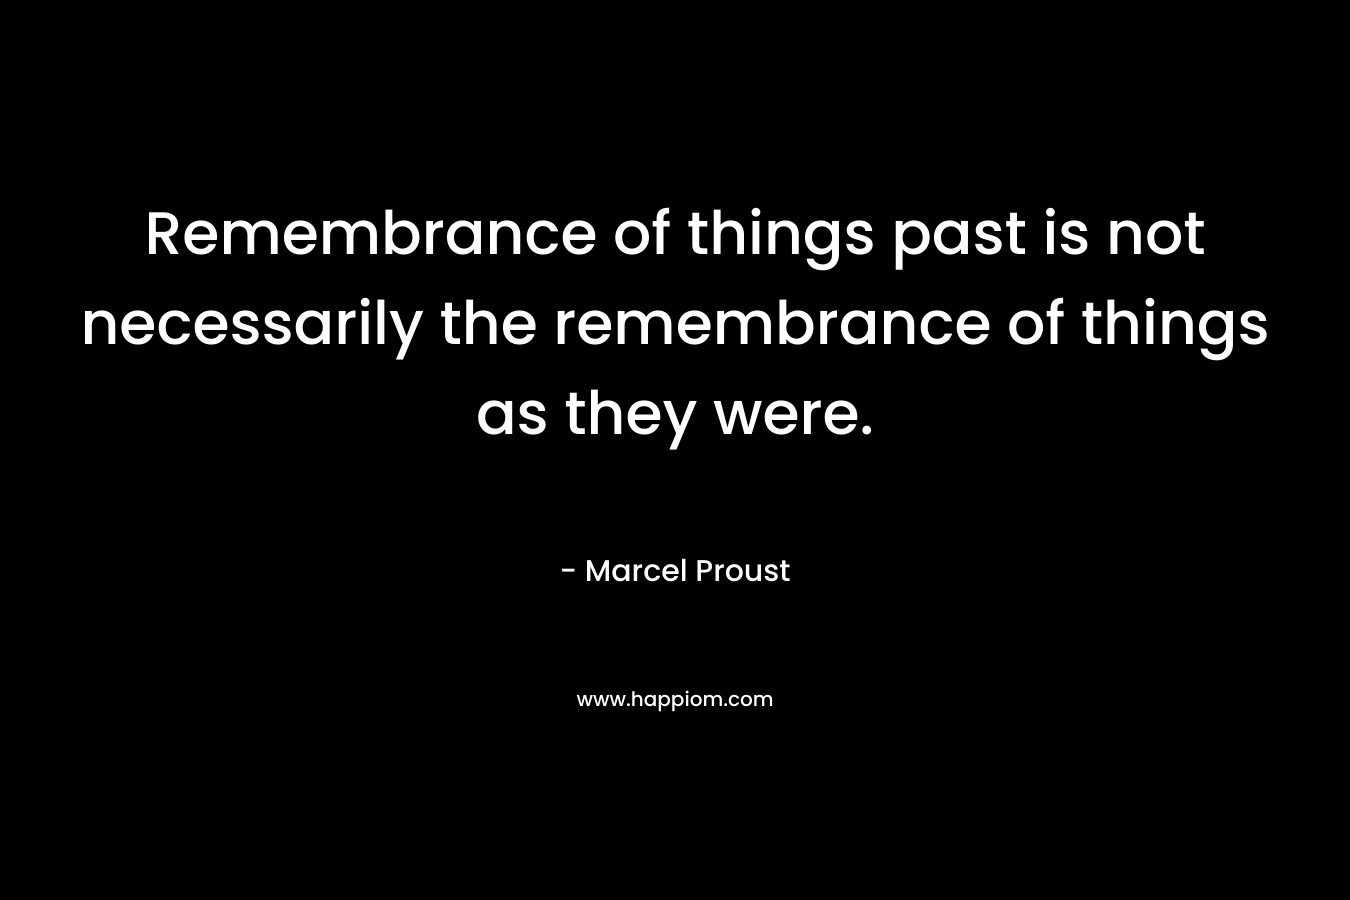 Remembrance of things past is not necessarily the remembrance of things as they were. – Marcel Proust